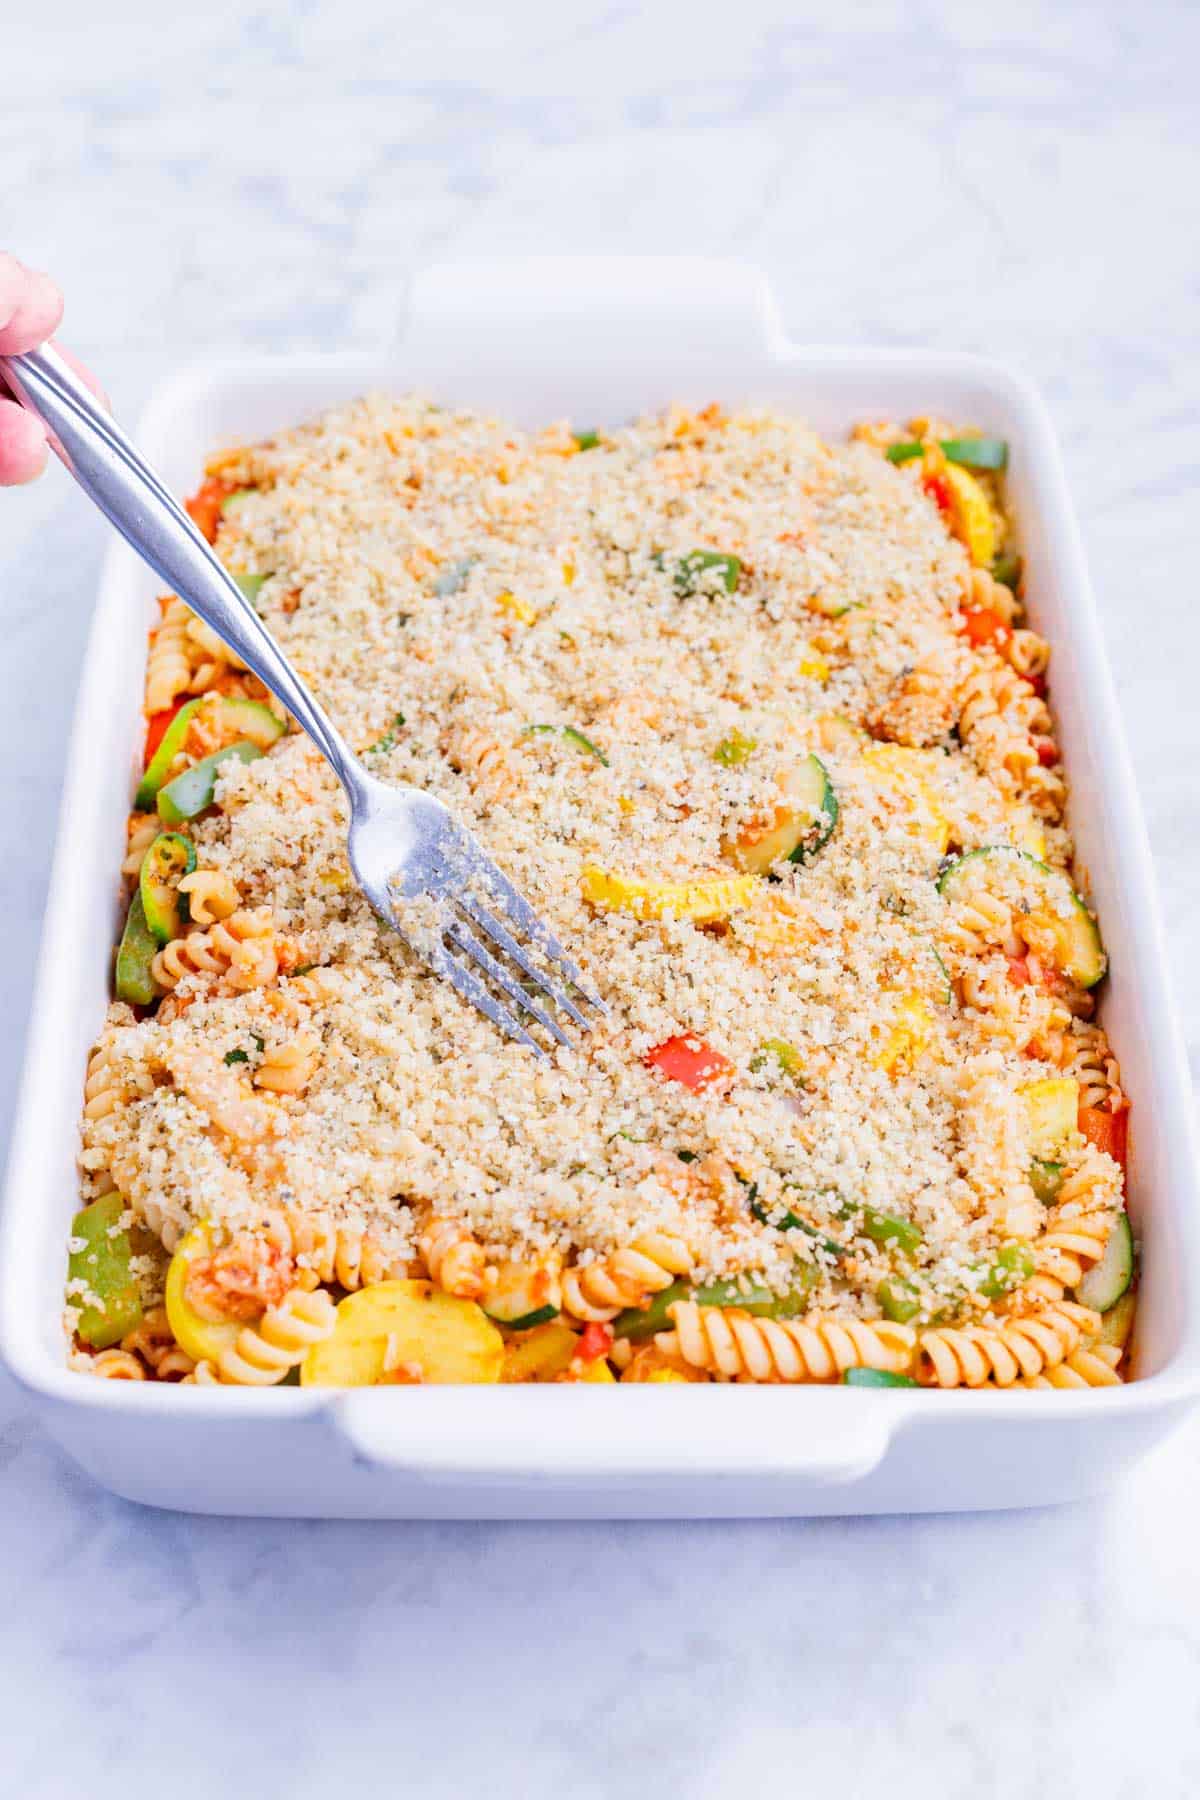 Breadcrumbs are spread across the top of the pasta.